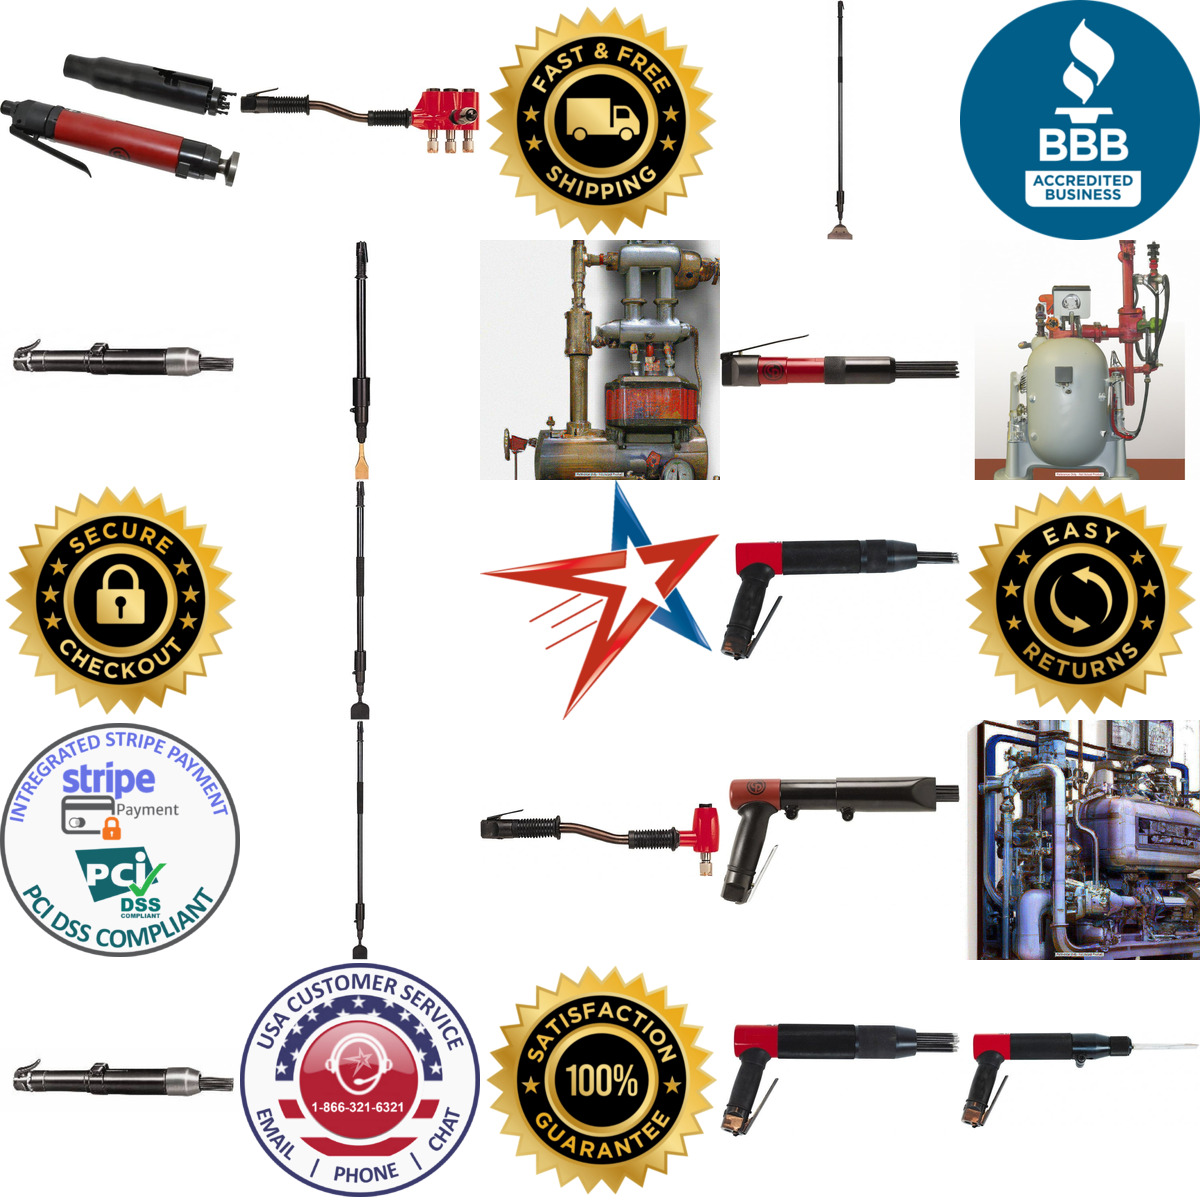 A selection of Chicago Pneumatic products on GoVets